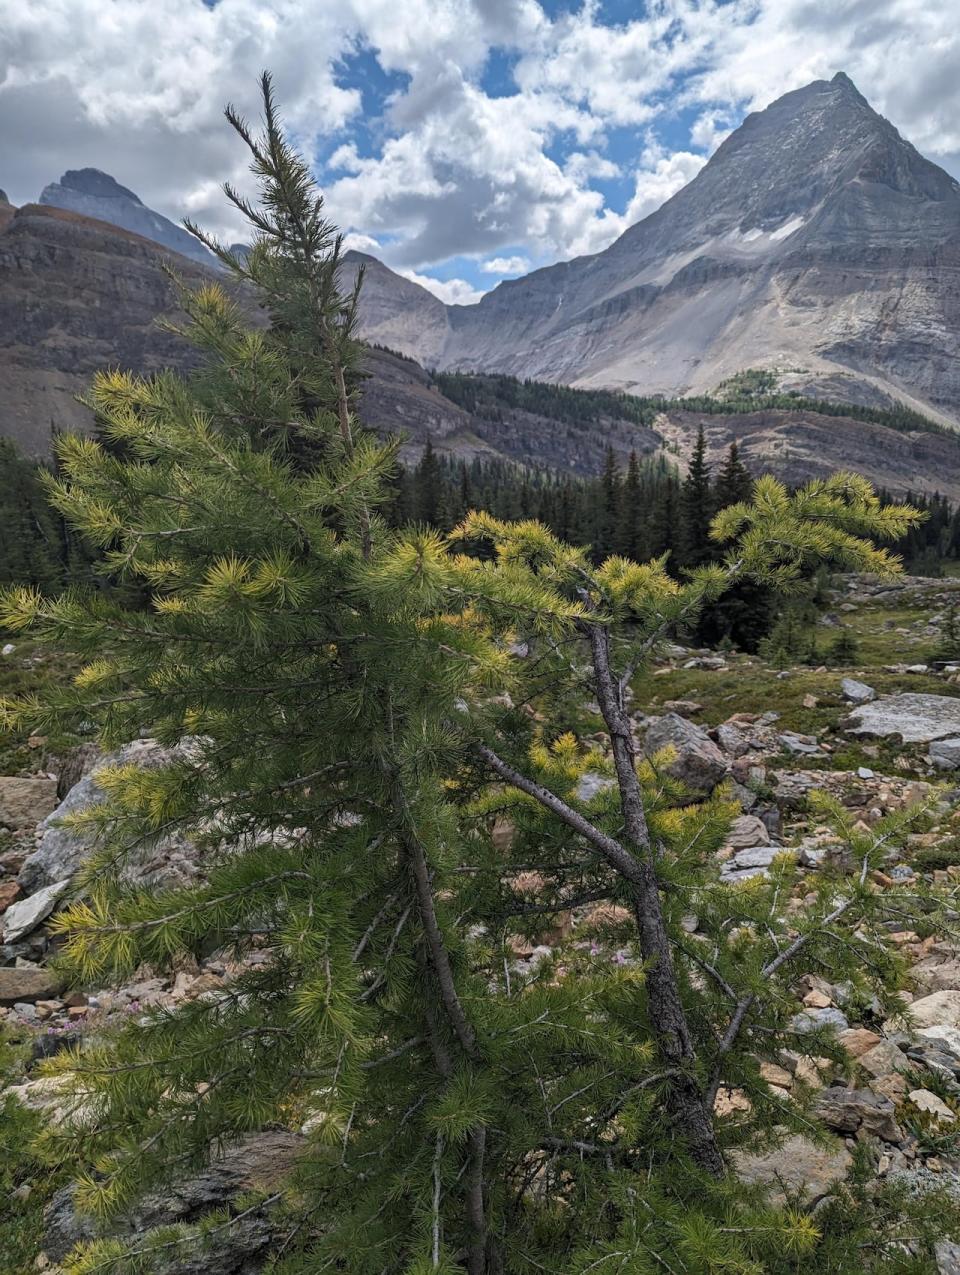 A Calgary biology professor says it's too early to tell if all larches will turn early, or if it's a sign of heat and drought stress in some trees.